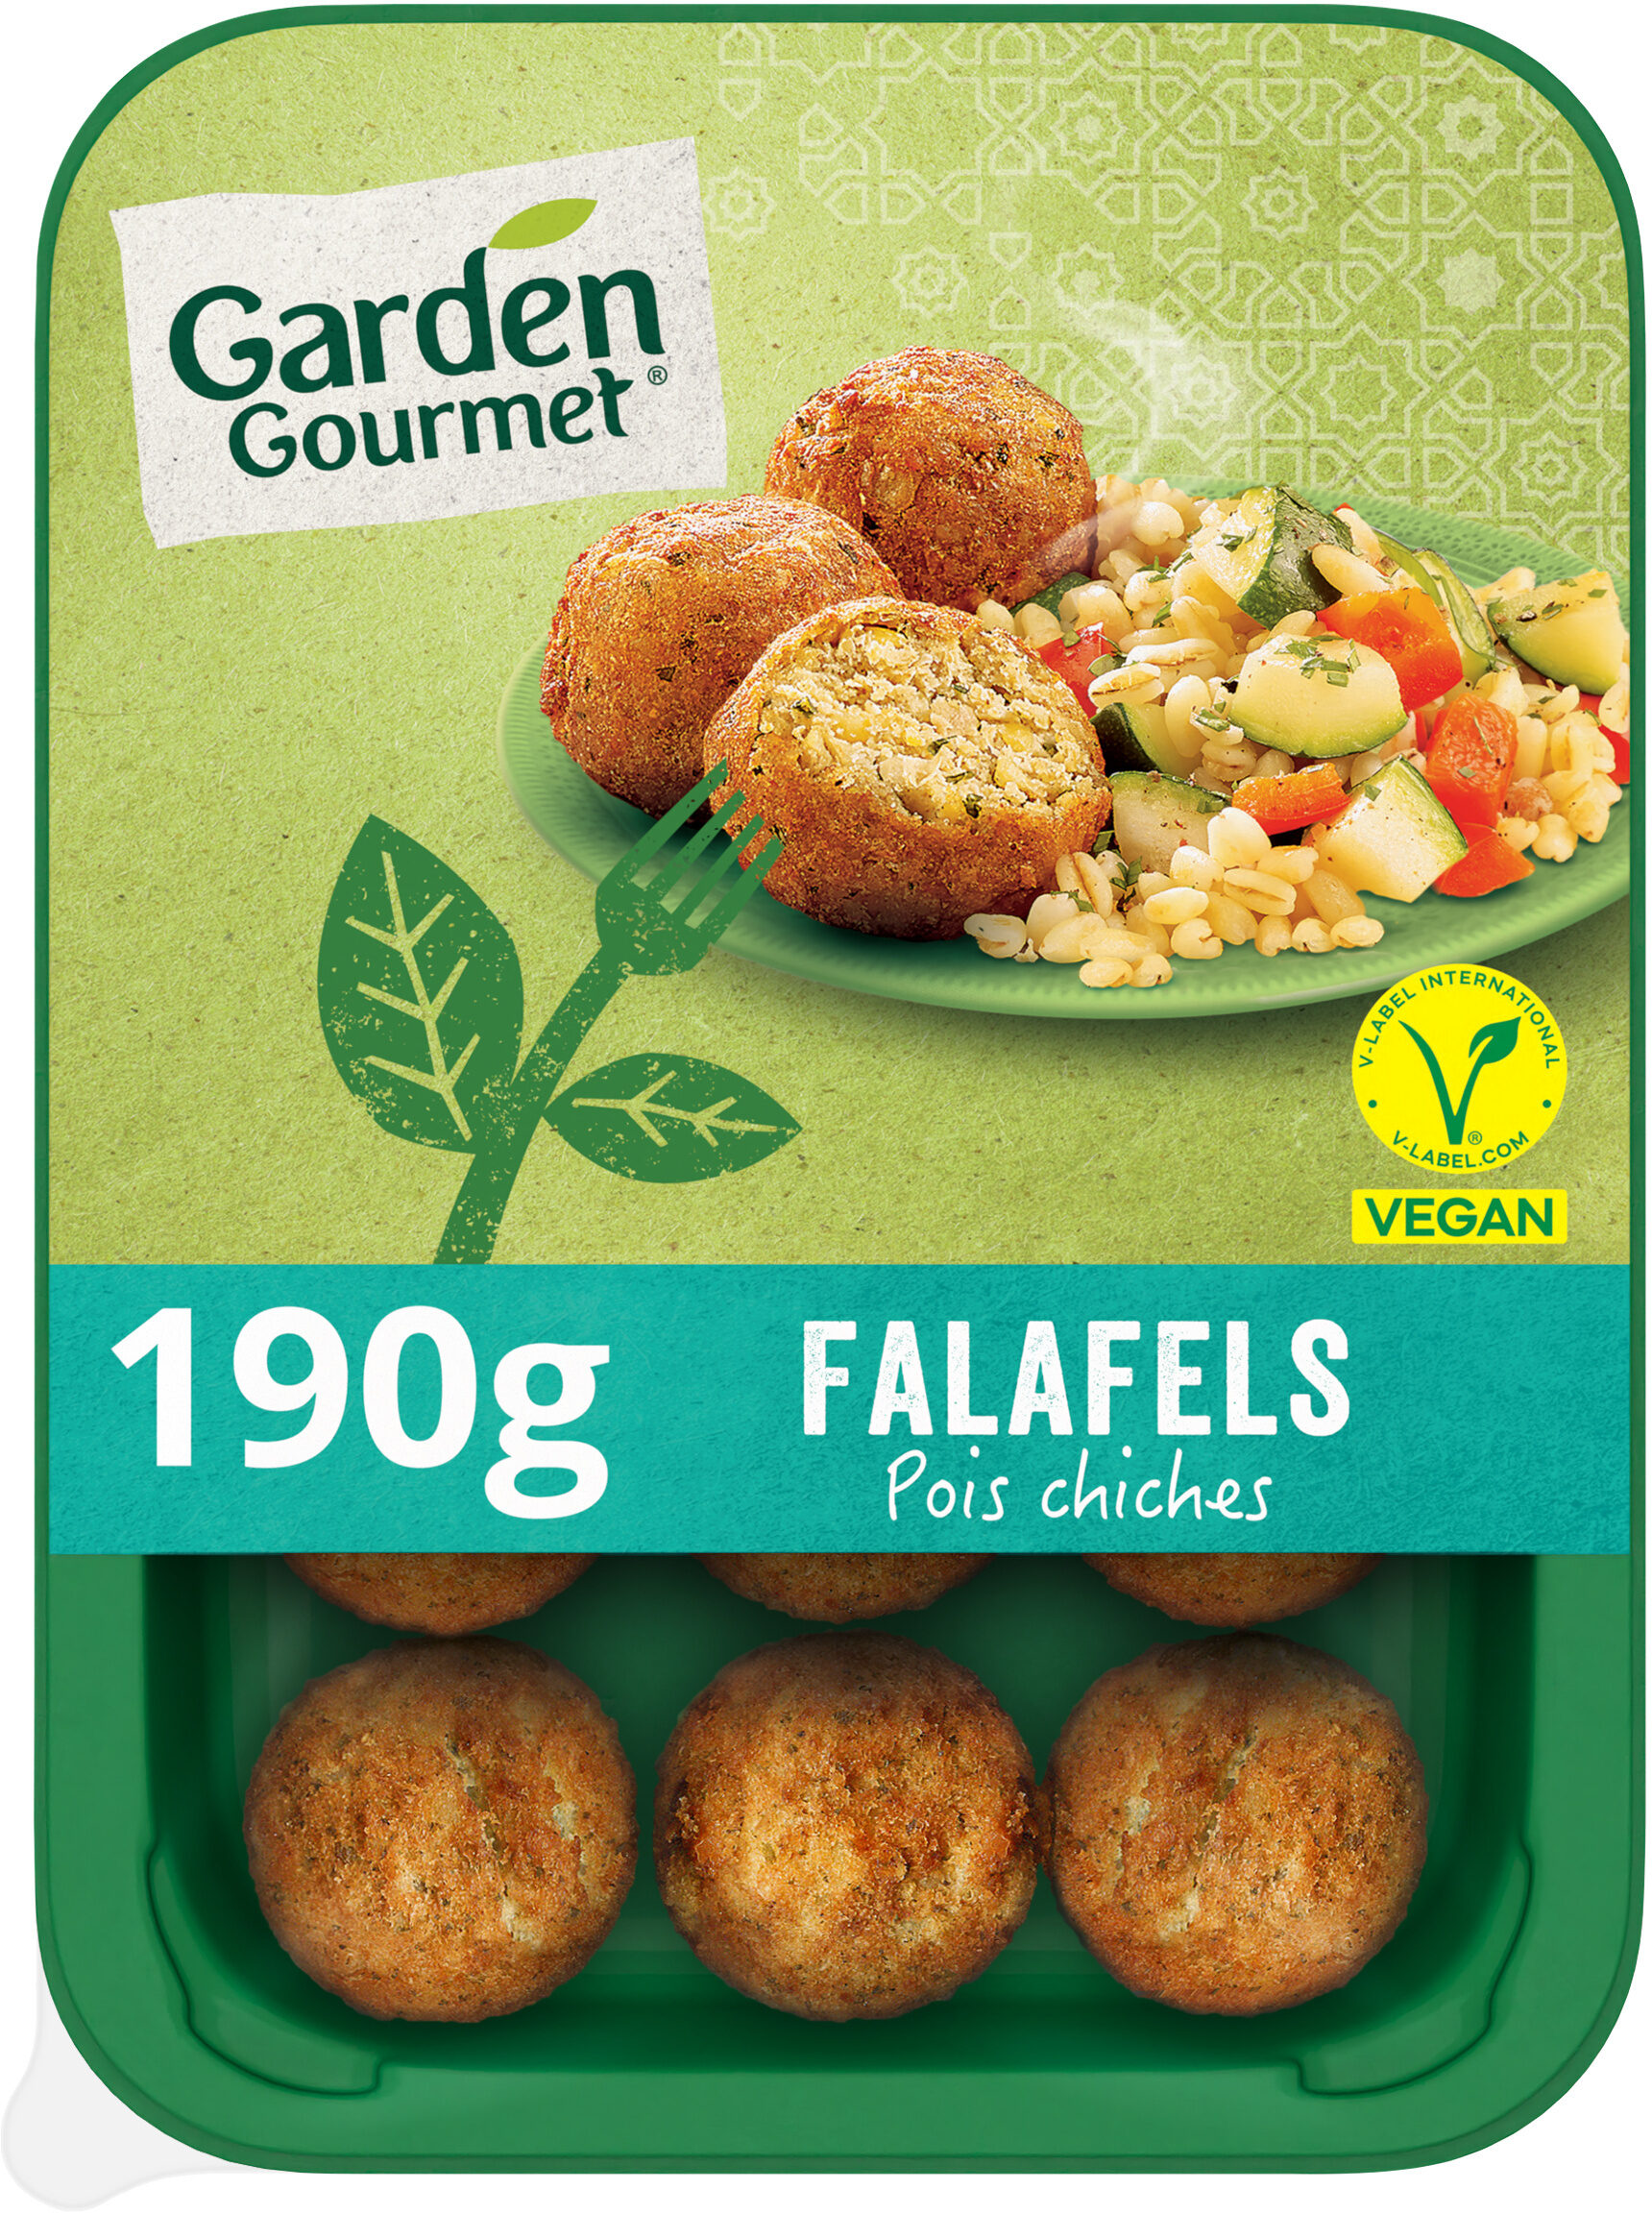 Falafels Pois chiches - Product - fr